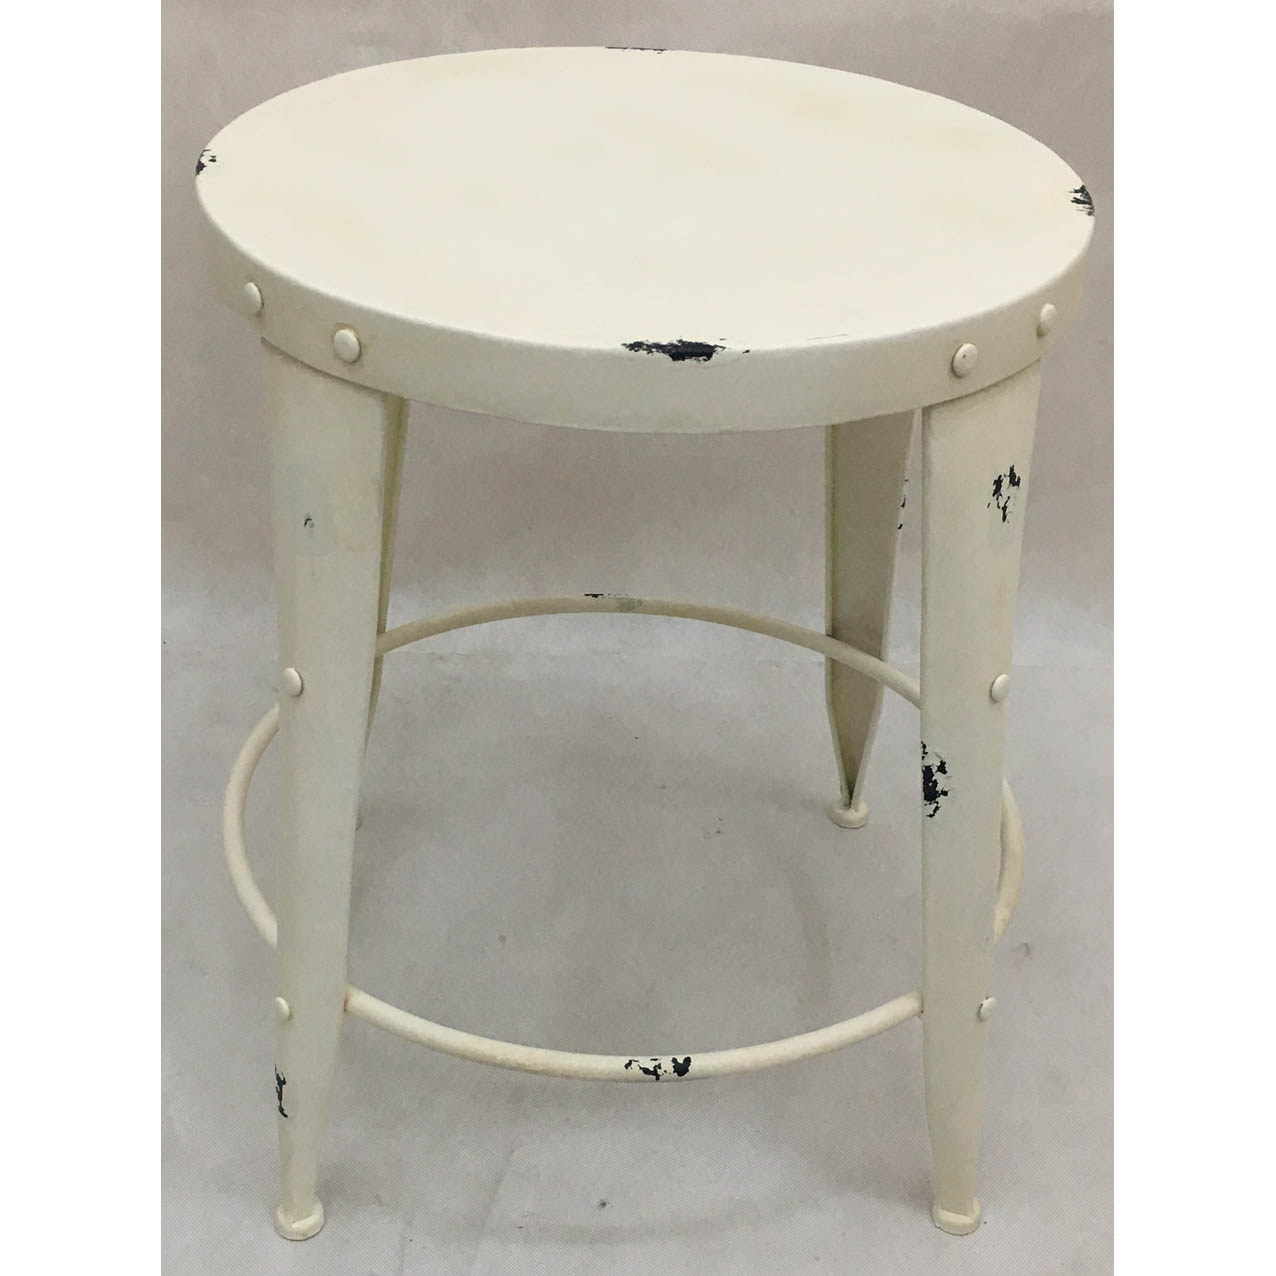 Distressed white round metal side table